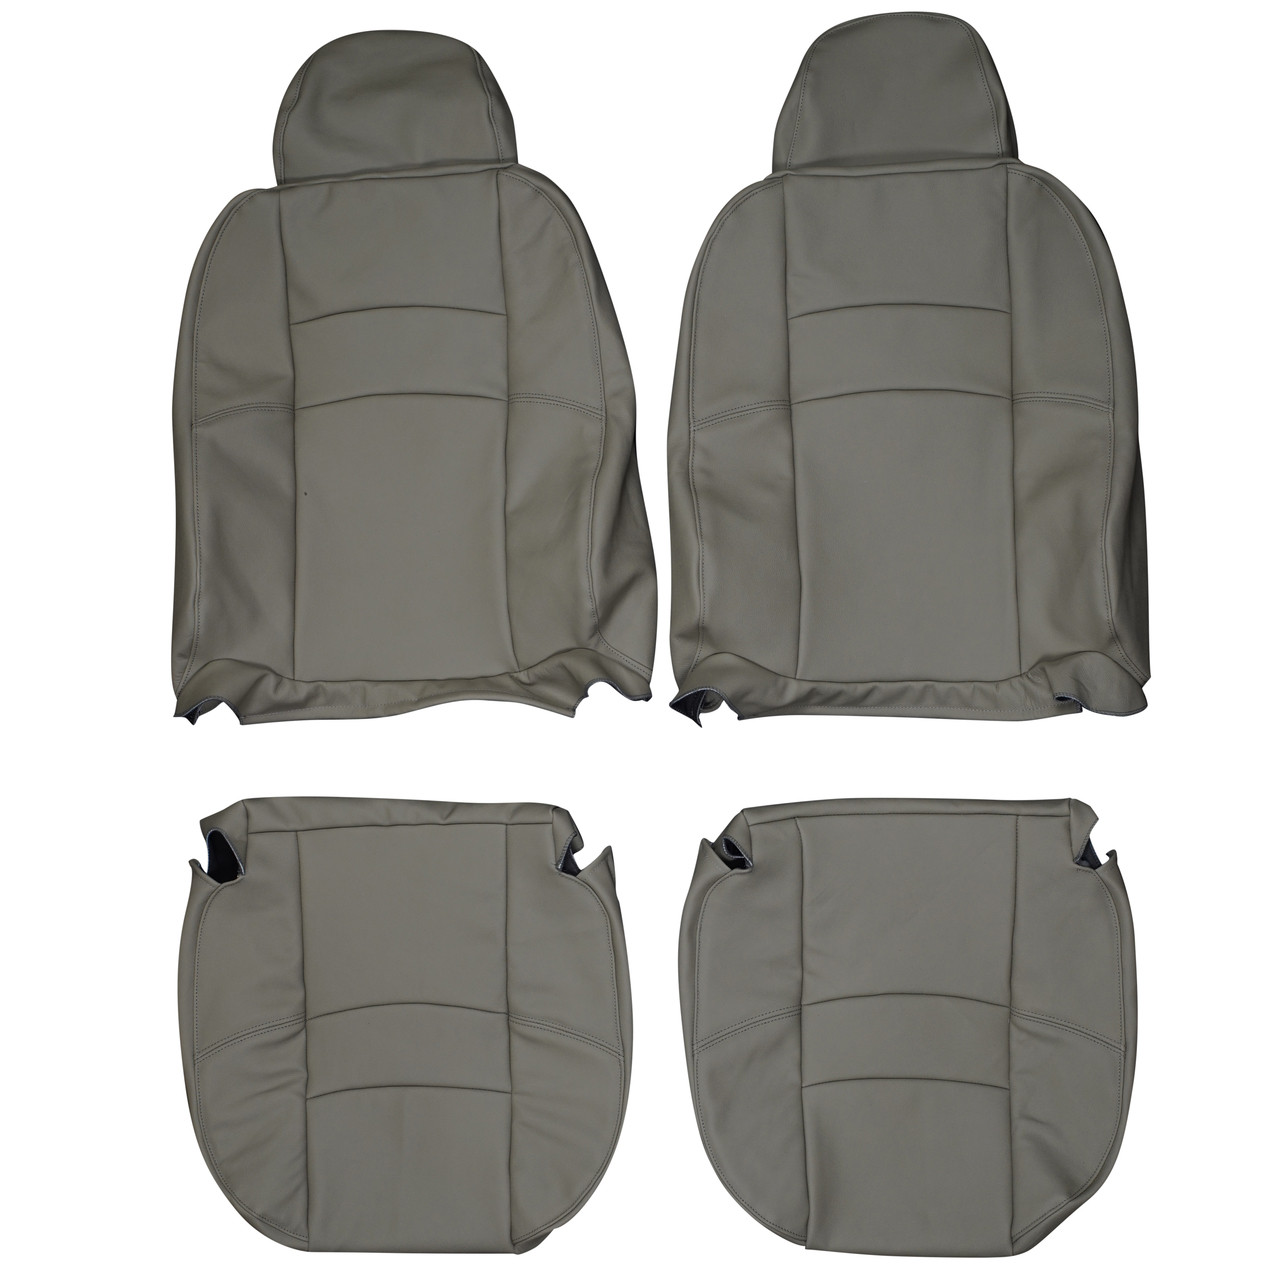 Volvo C70 Pair of Front GREY & BLACK Leatherette Car Seat Covers 